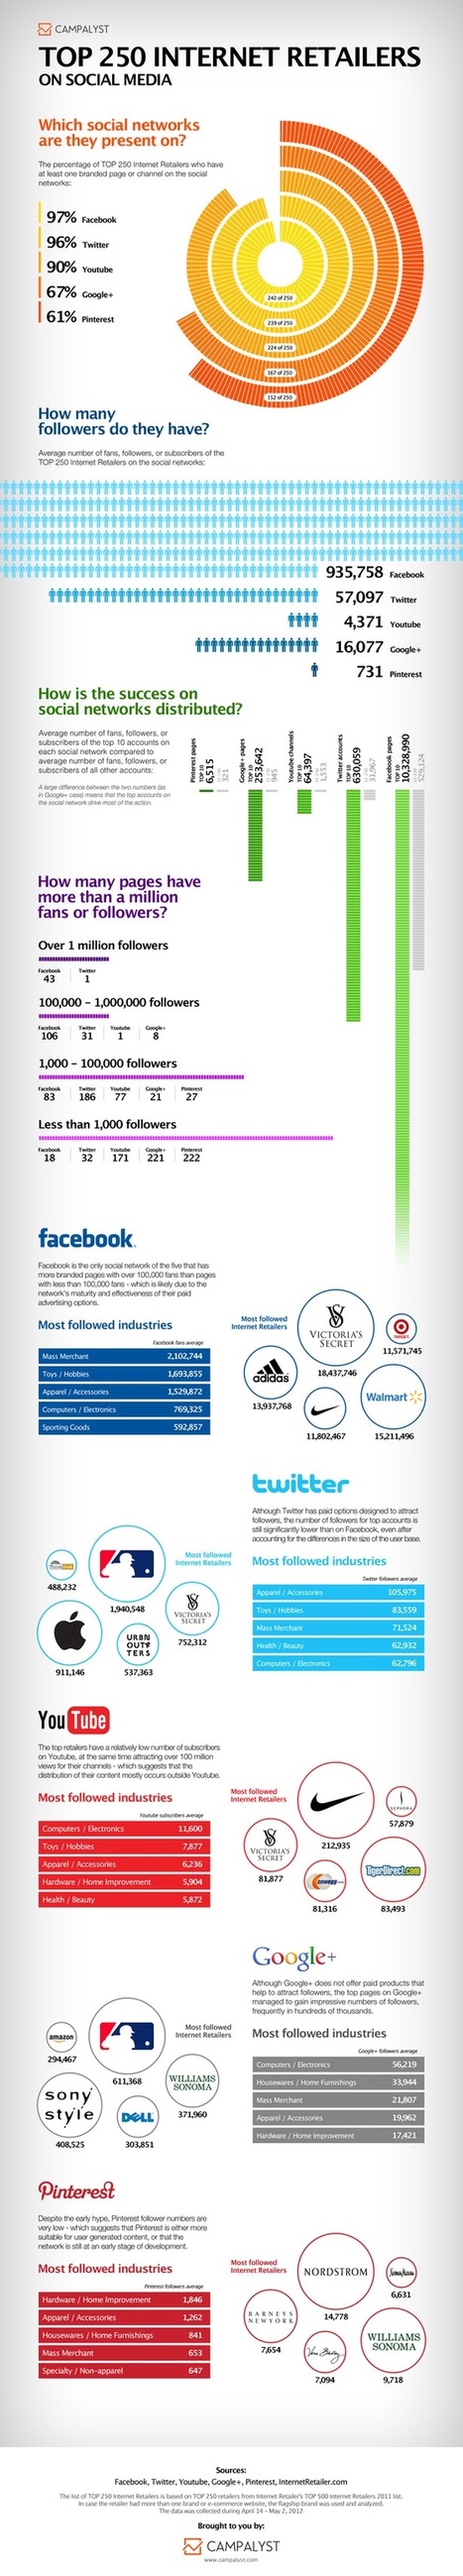 Top Social Internet Retailers [Infographic] | Communicate...and how! | Scoop.it